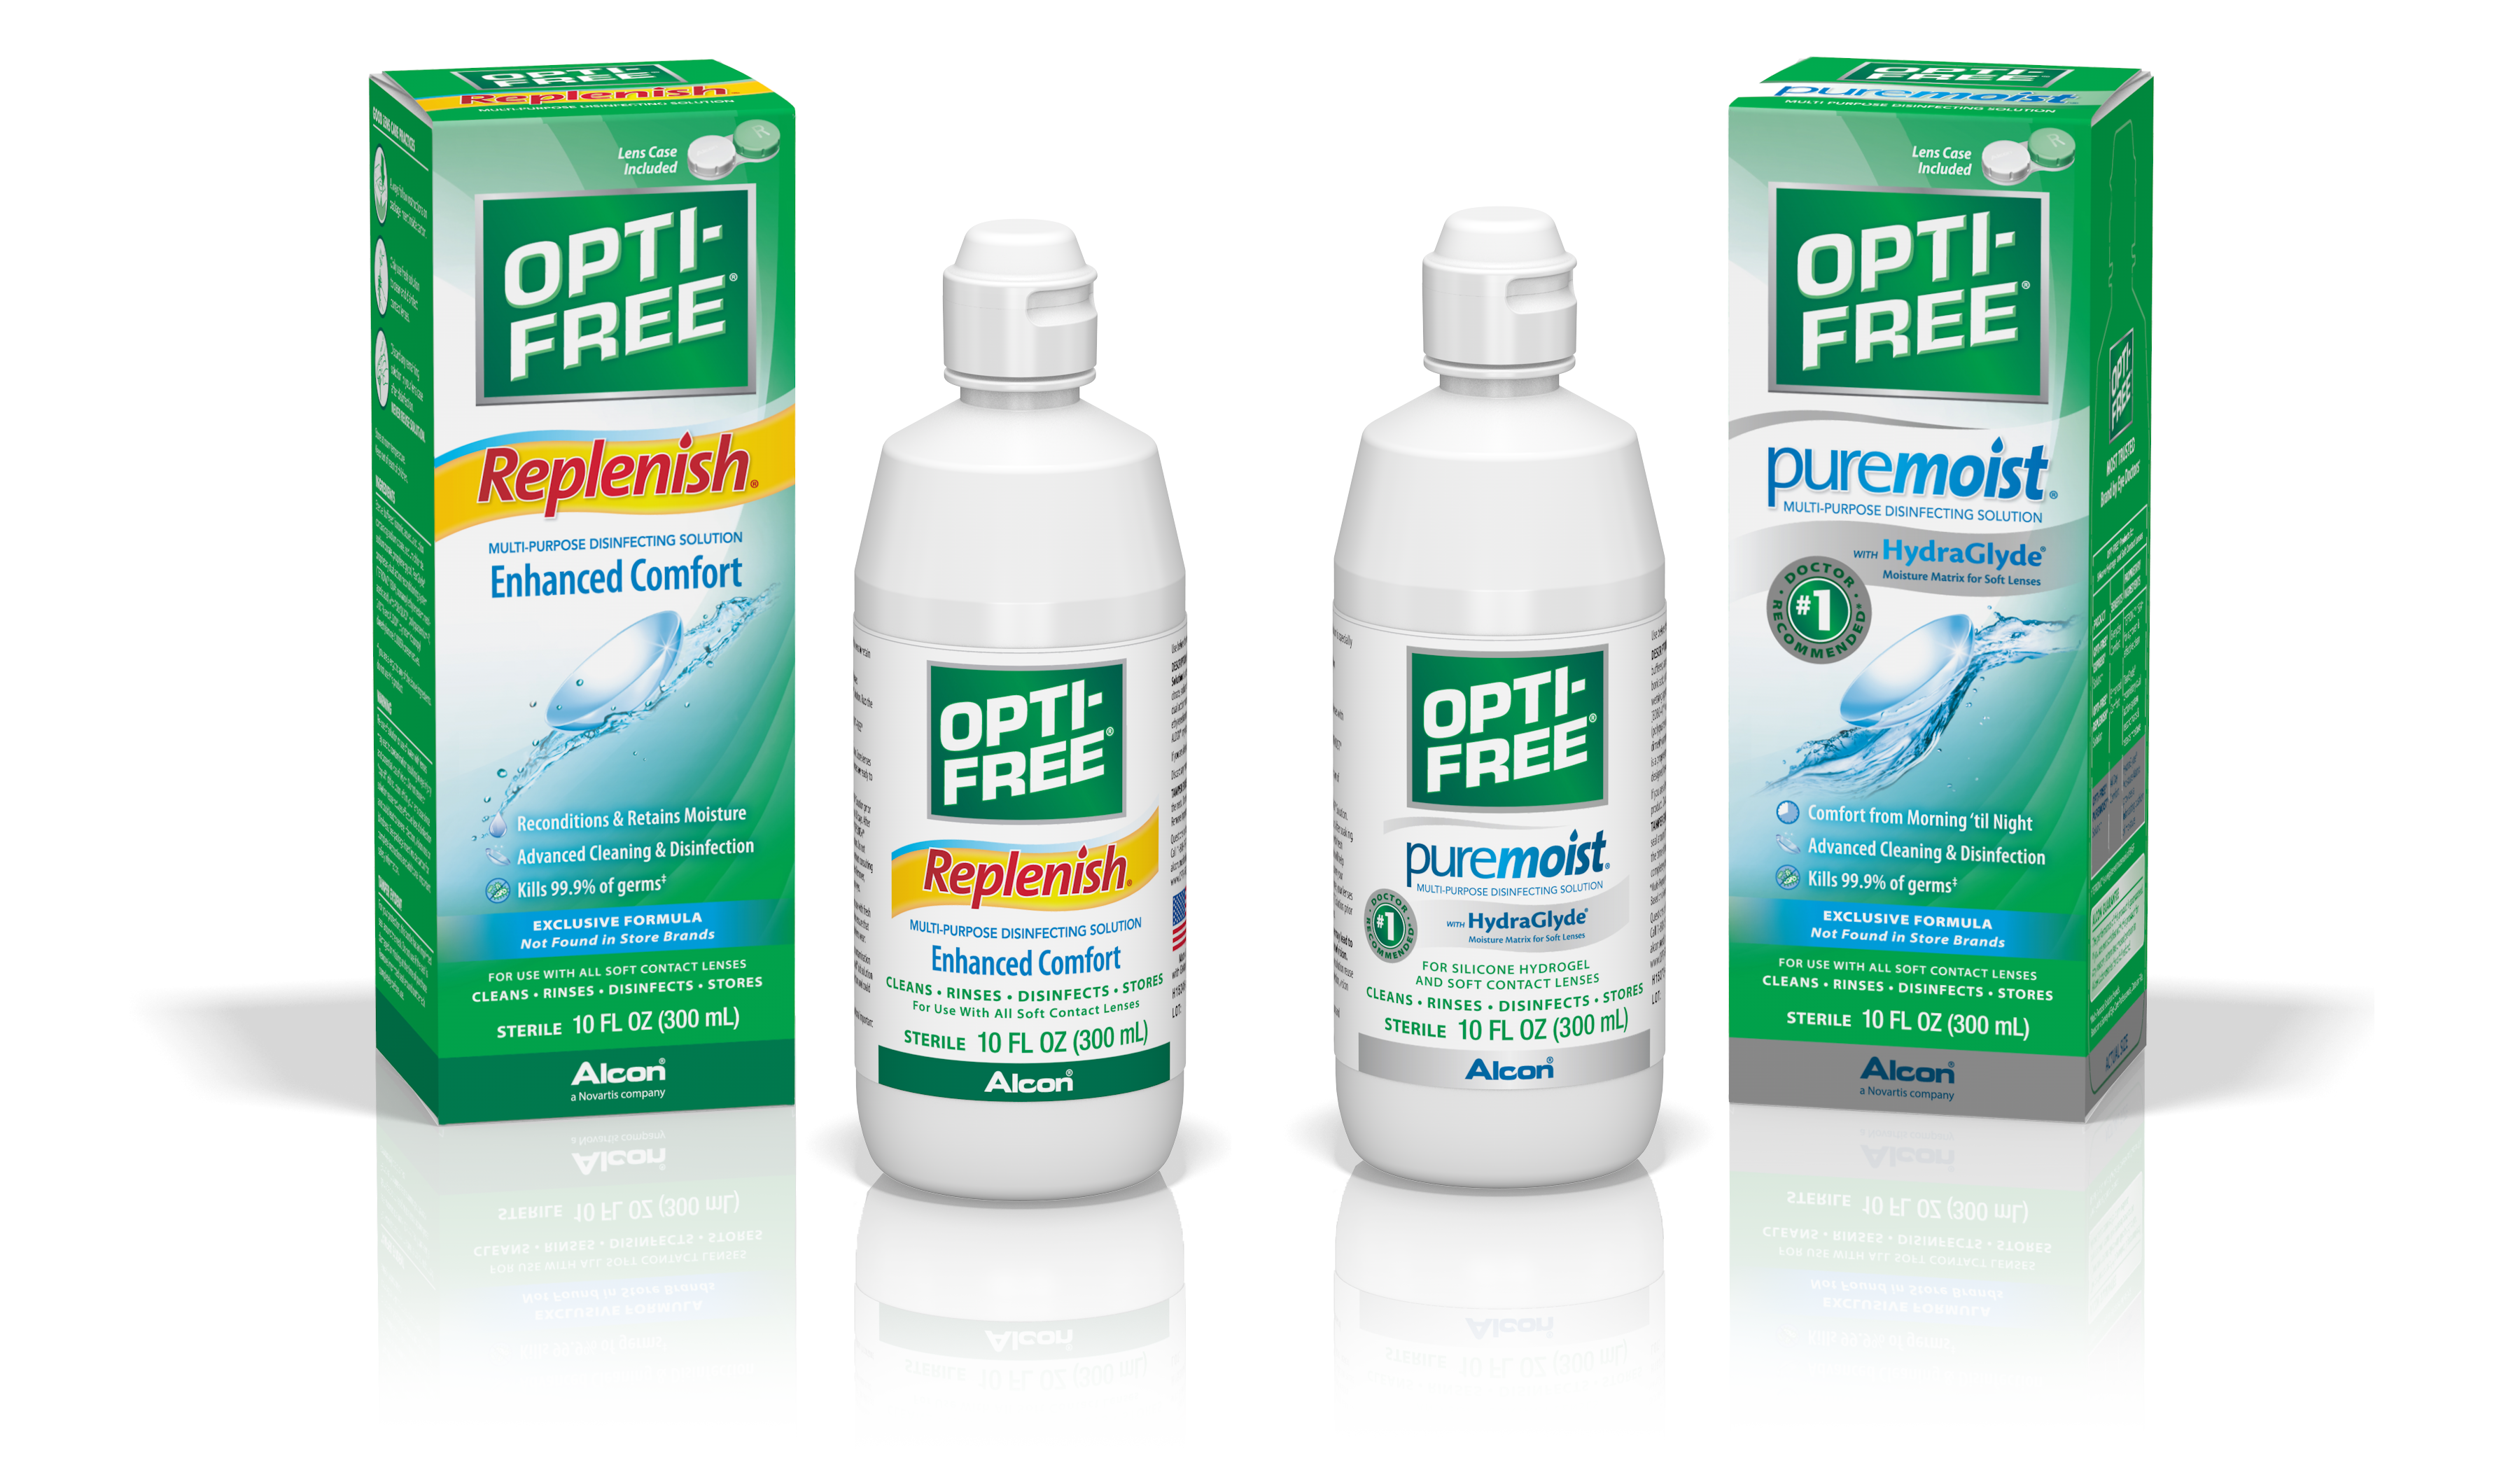 OPTI-FREE® is the #1 doctor-recommended brand of contact lens solution.